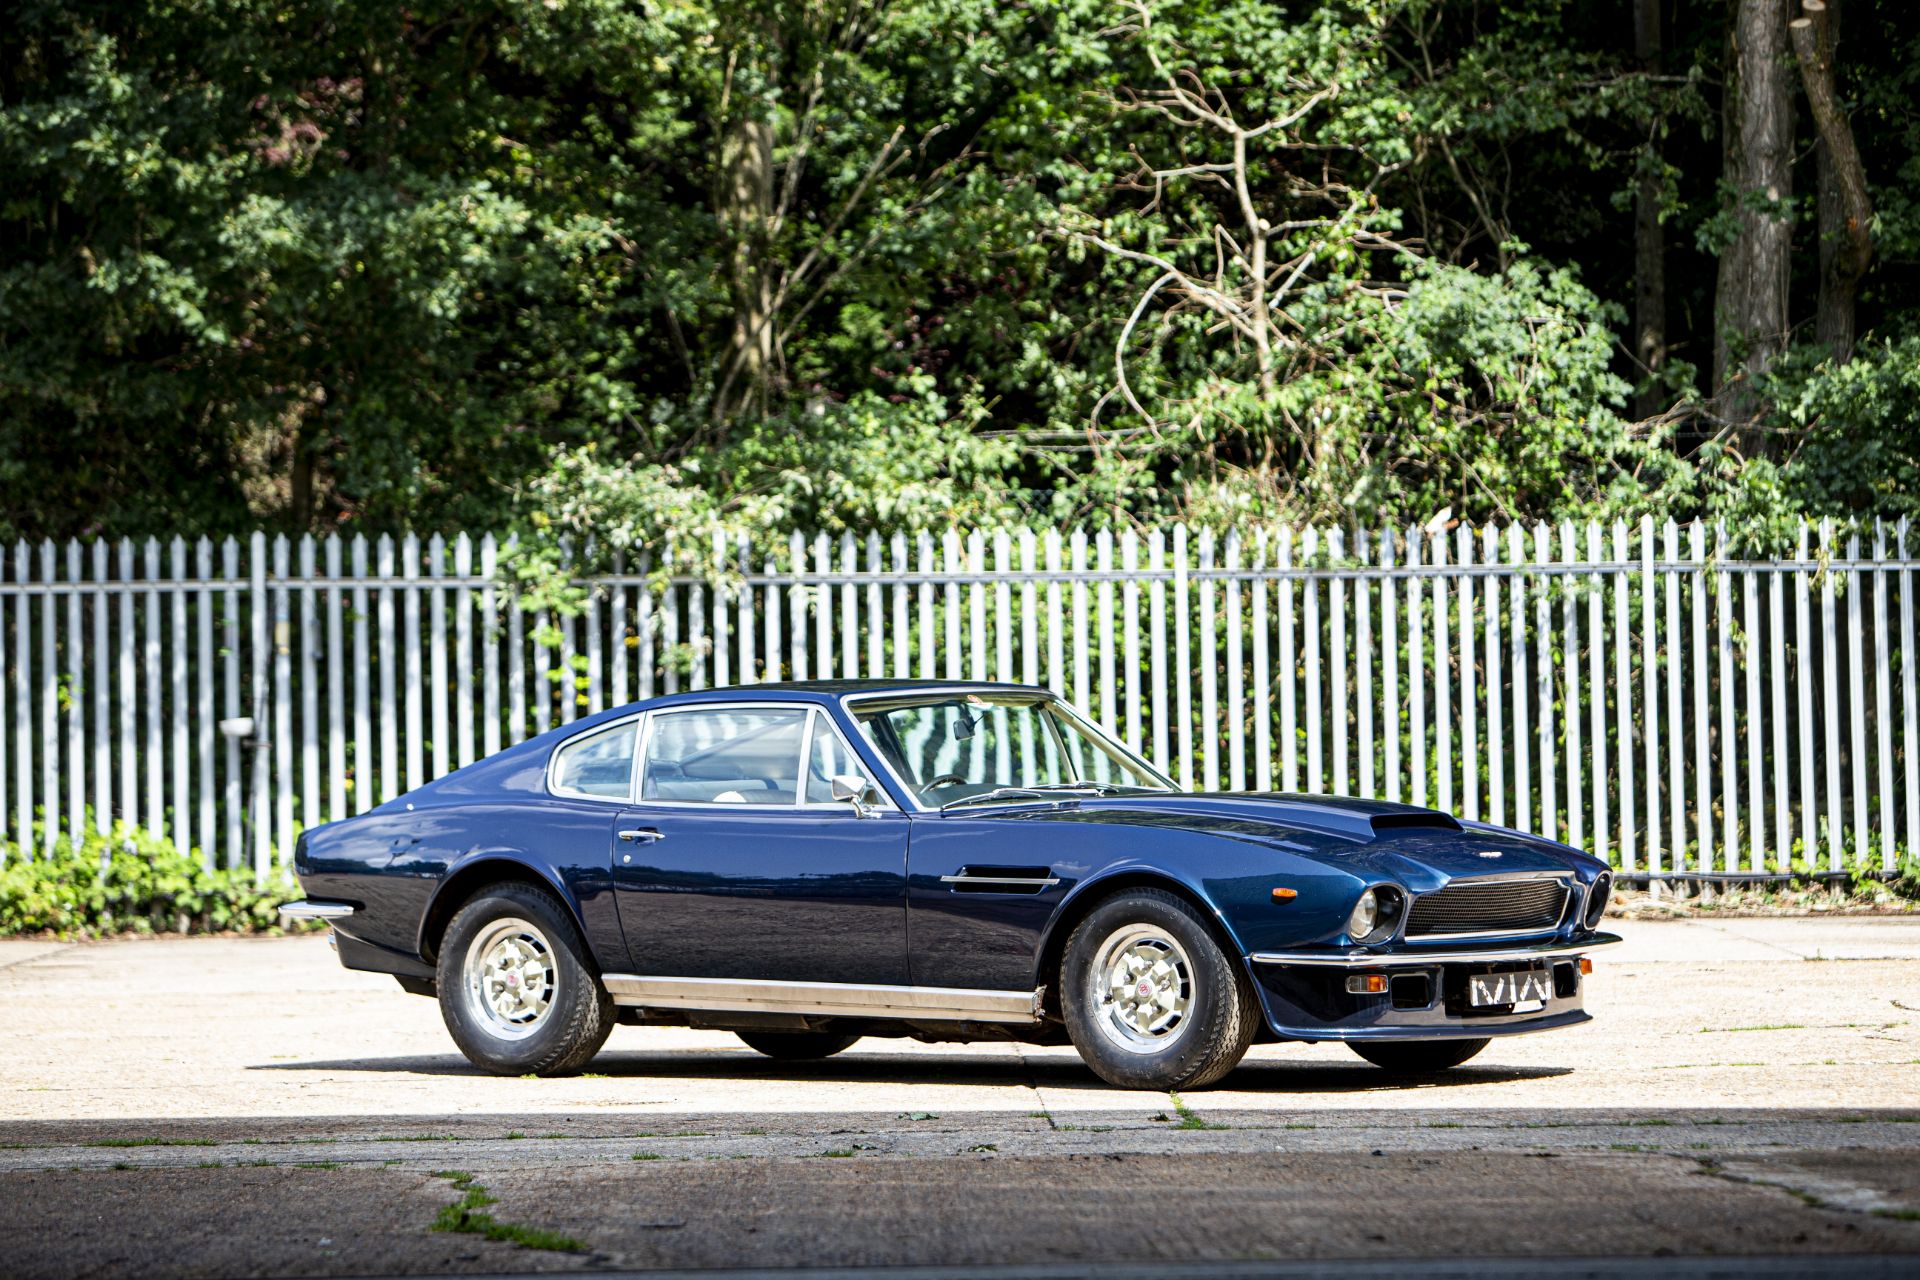 1978 Aston Martin V8 Series 3 Sports Saloon Chassis no. V8/11868/RCAS - Image 2 of 2